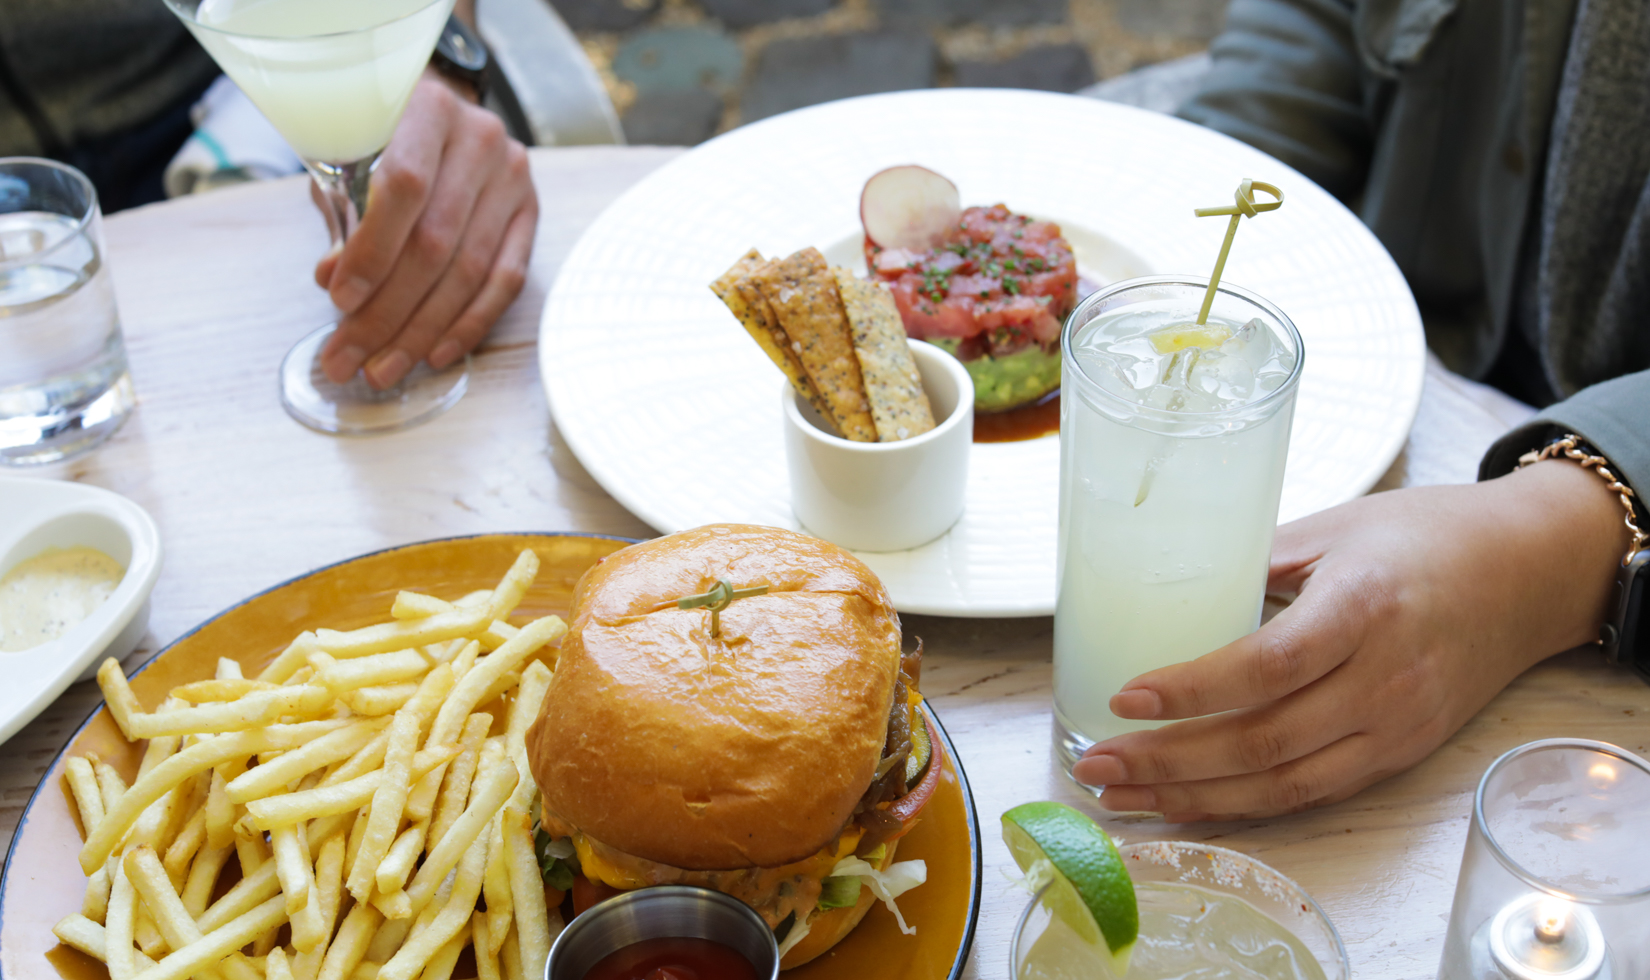 burger with french fries and cocktails in a restaurant courtyard patio